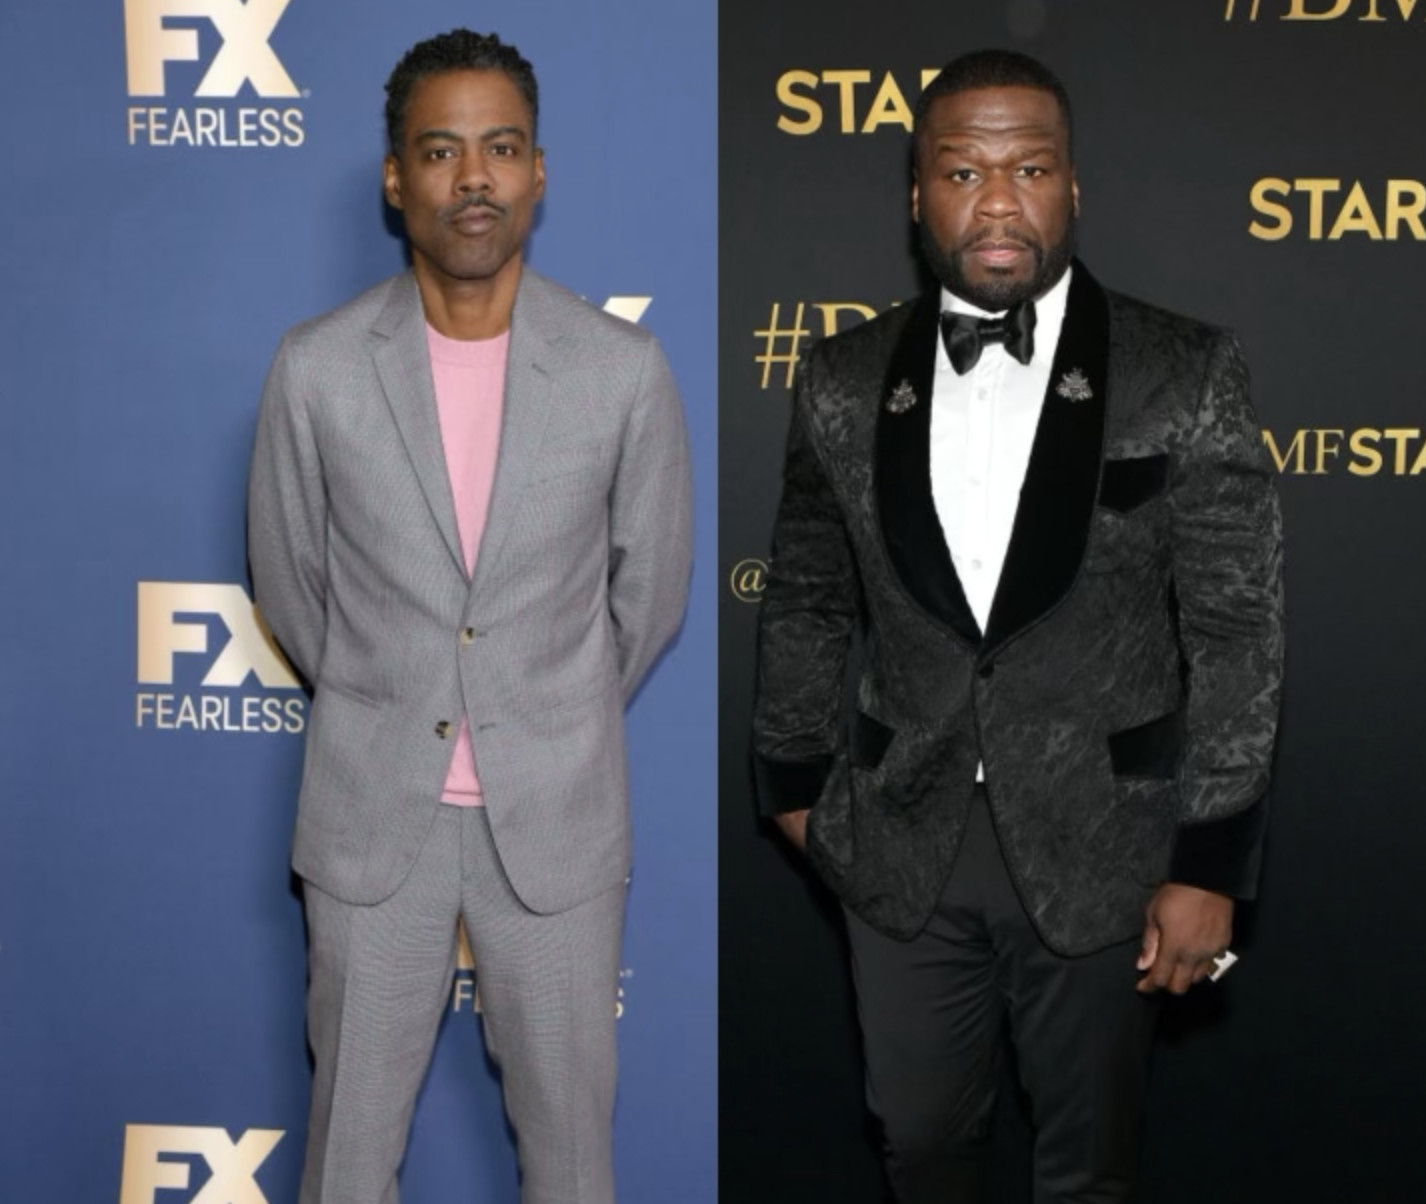 Chris Rock Decides Against Filing A Police Report Following Will Smith Slap, 50 Cent Praises Comedian